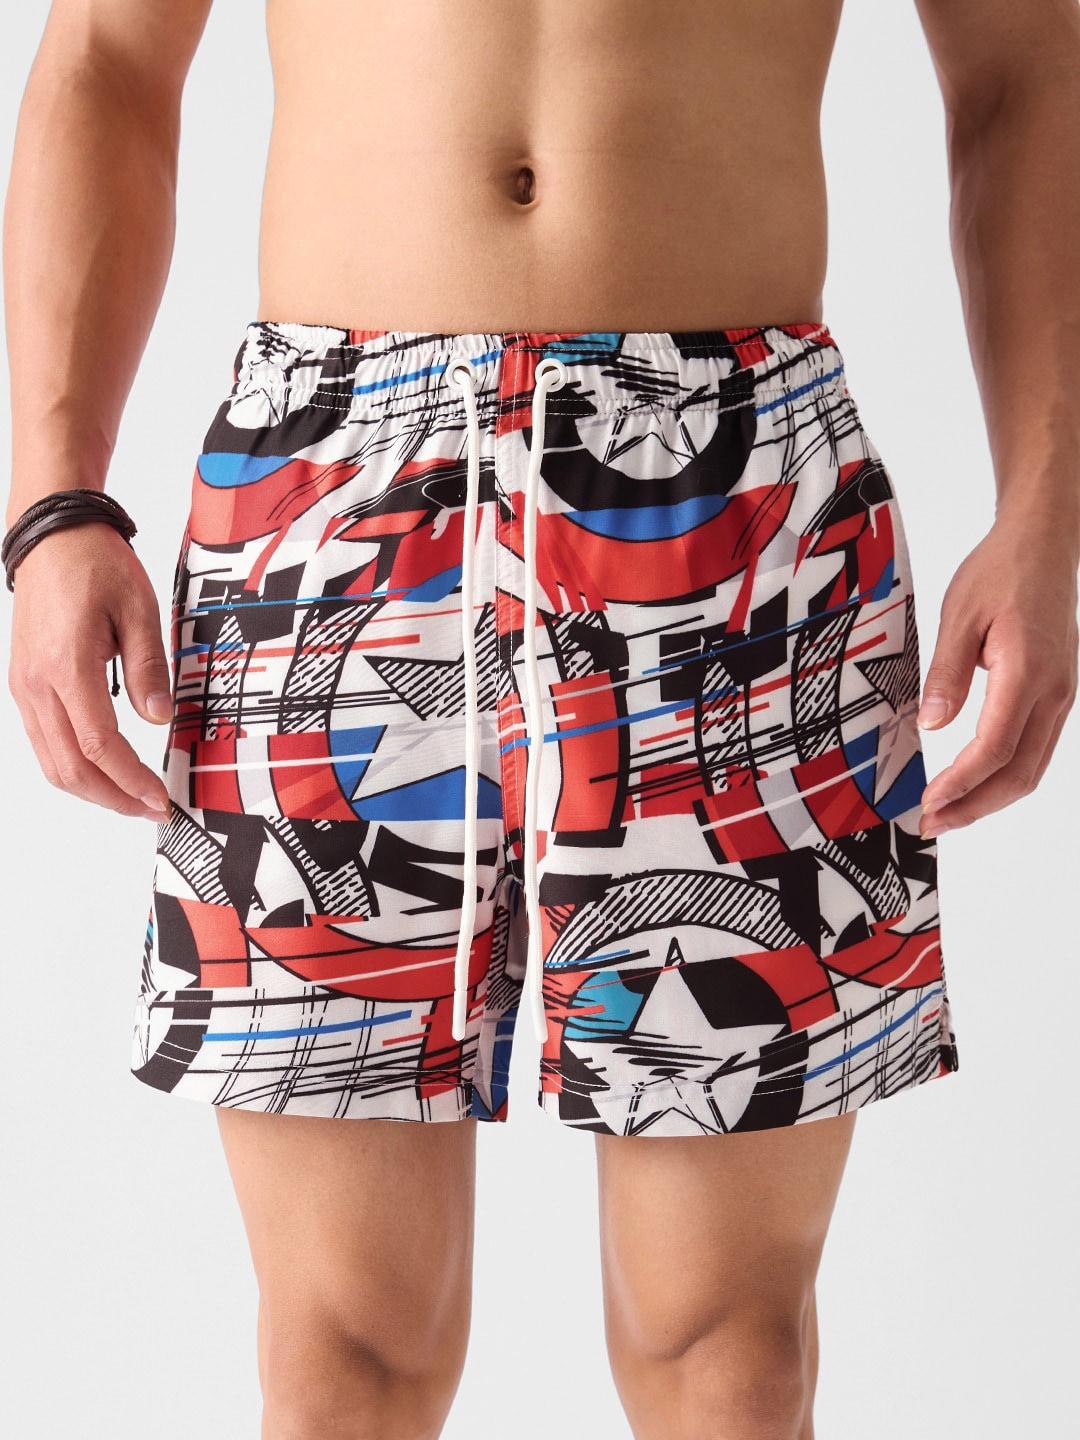 the-souled-store-men-white-mid-rise-captain-america-printed-sports-shorts